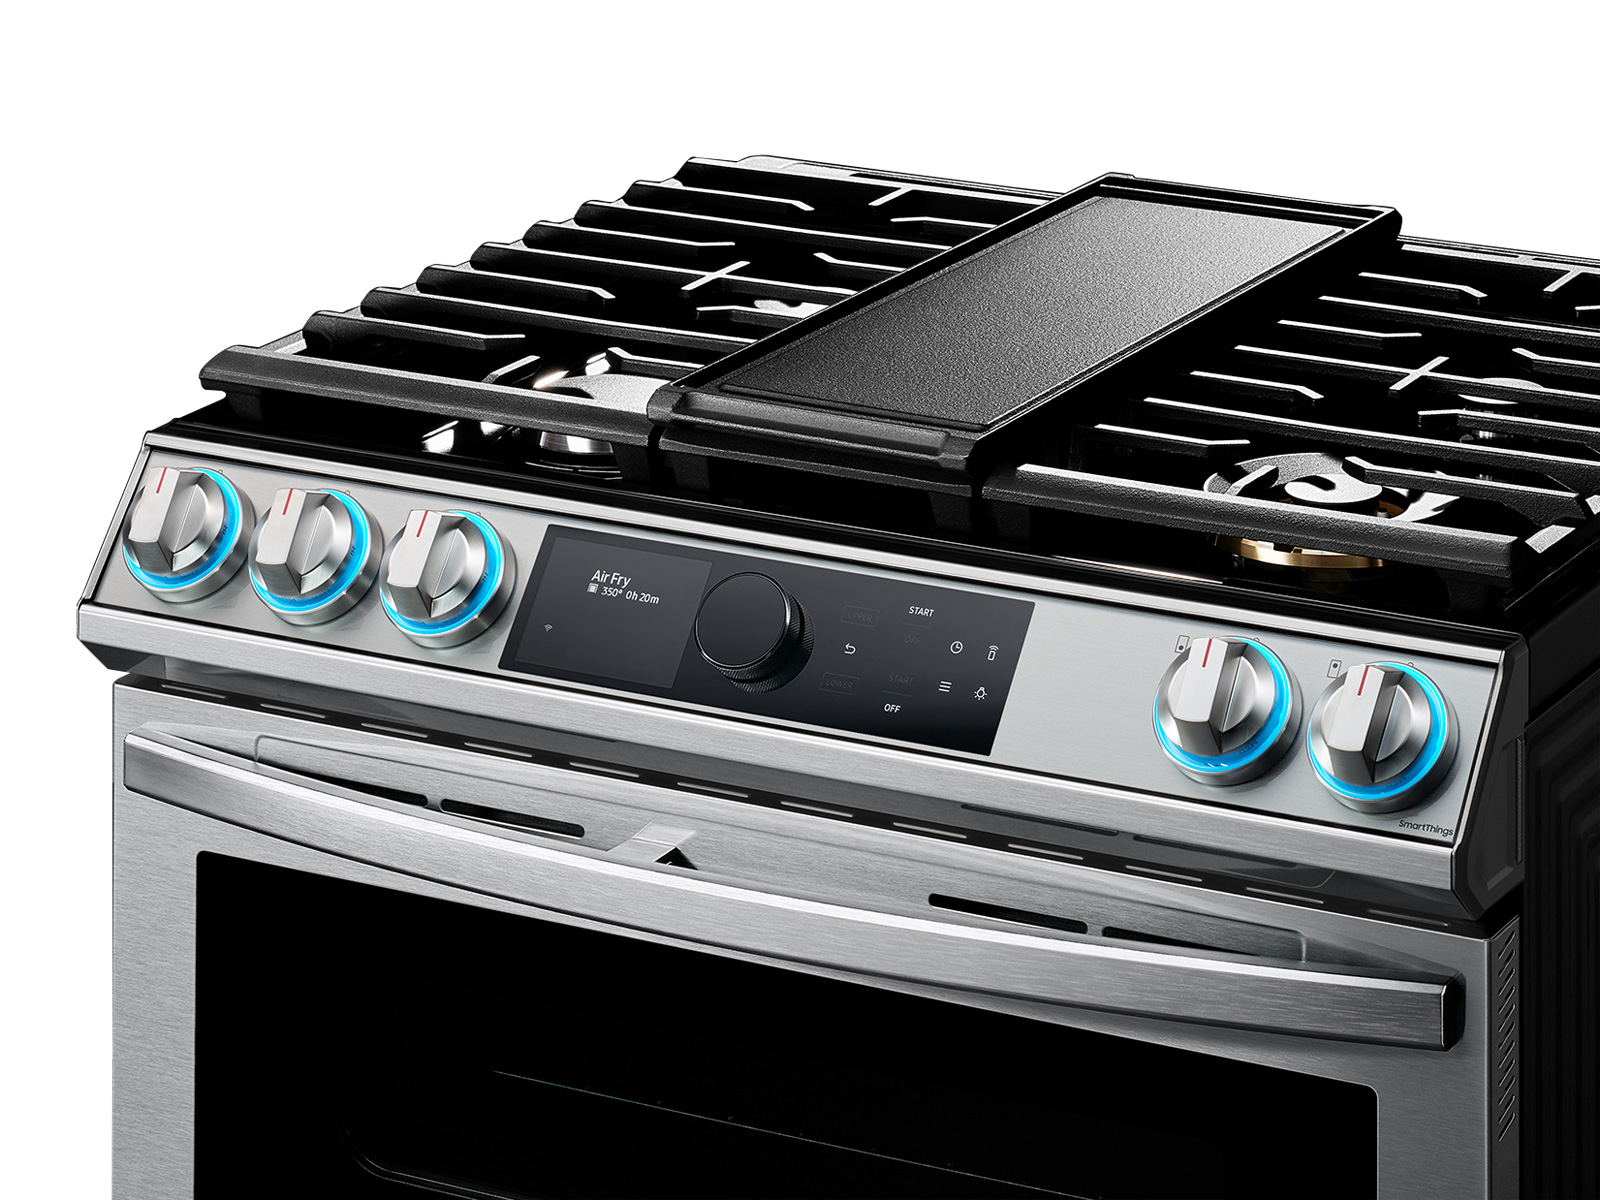 Samsung NX60A6751SS 6.0 Cu. ft. Smart Freestanding GAS Range with Flex Duo, Stainless